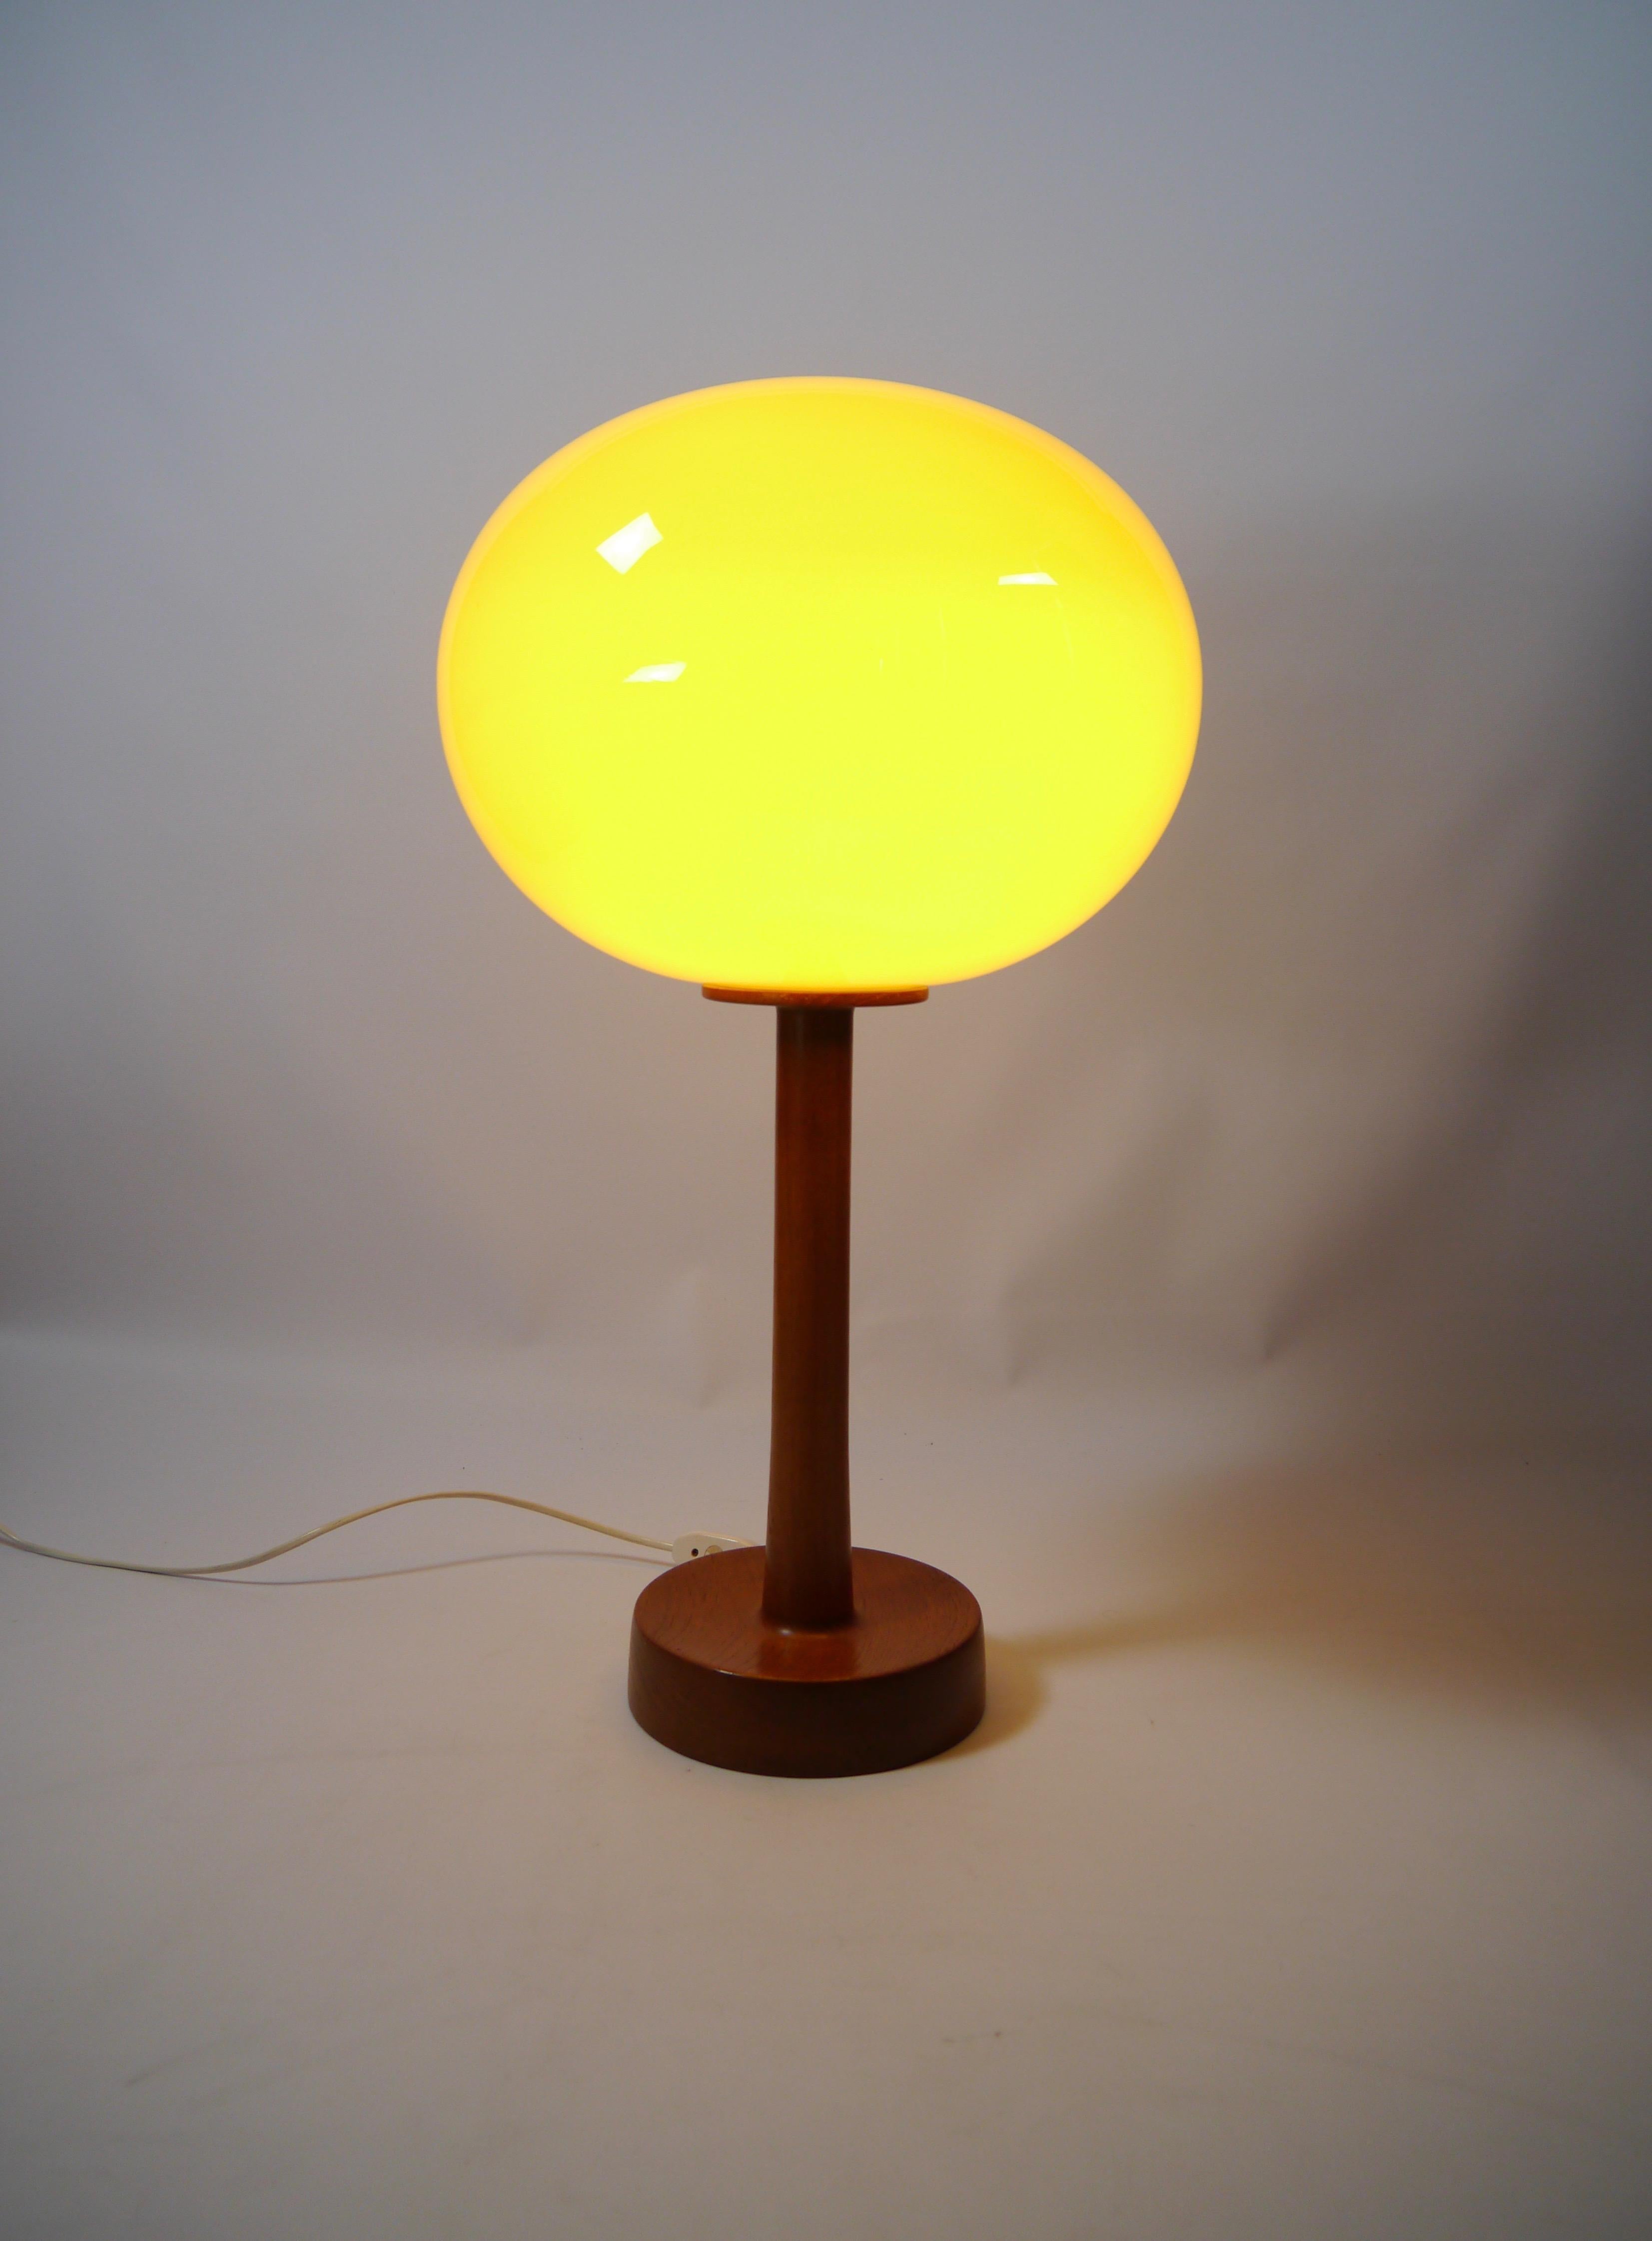 Rare tall teak and glass table lamp designed by Uno & Östen Kristiansson for Luxus Vittsjö. Teak of rich grain and glow, oval shaped yellow glass shade which gives a warm light.